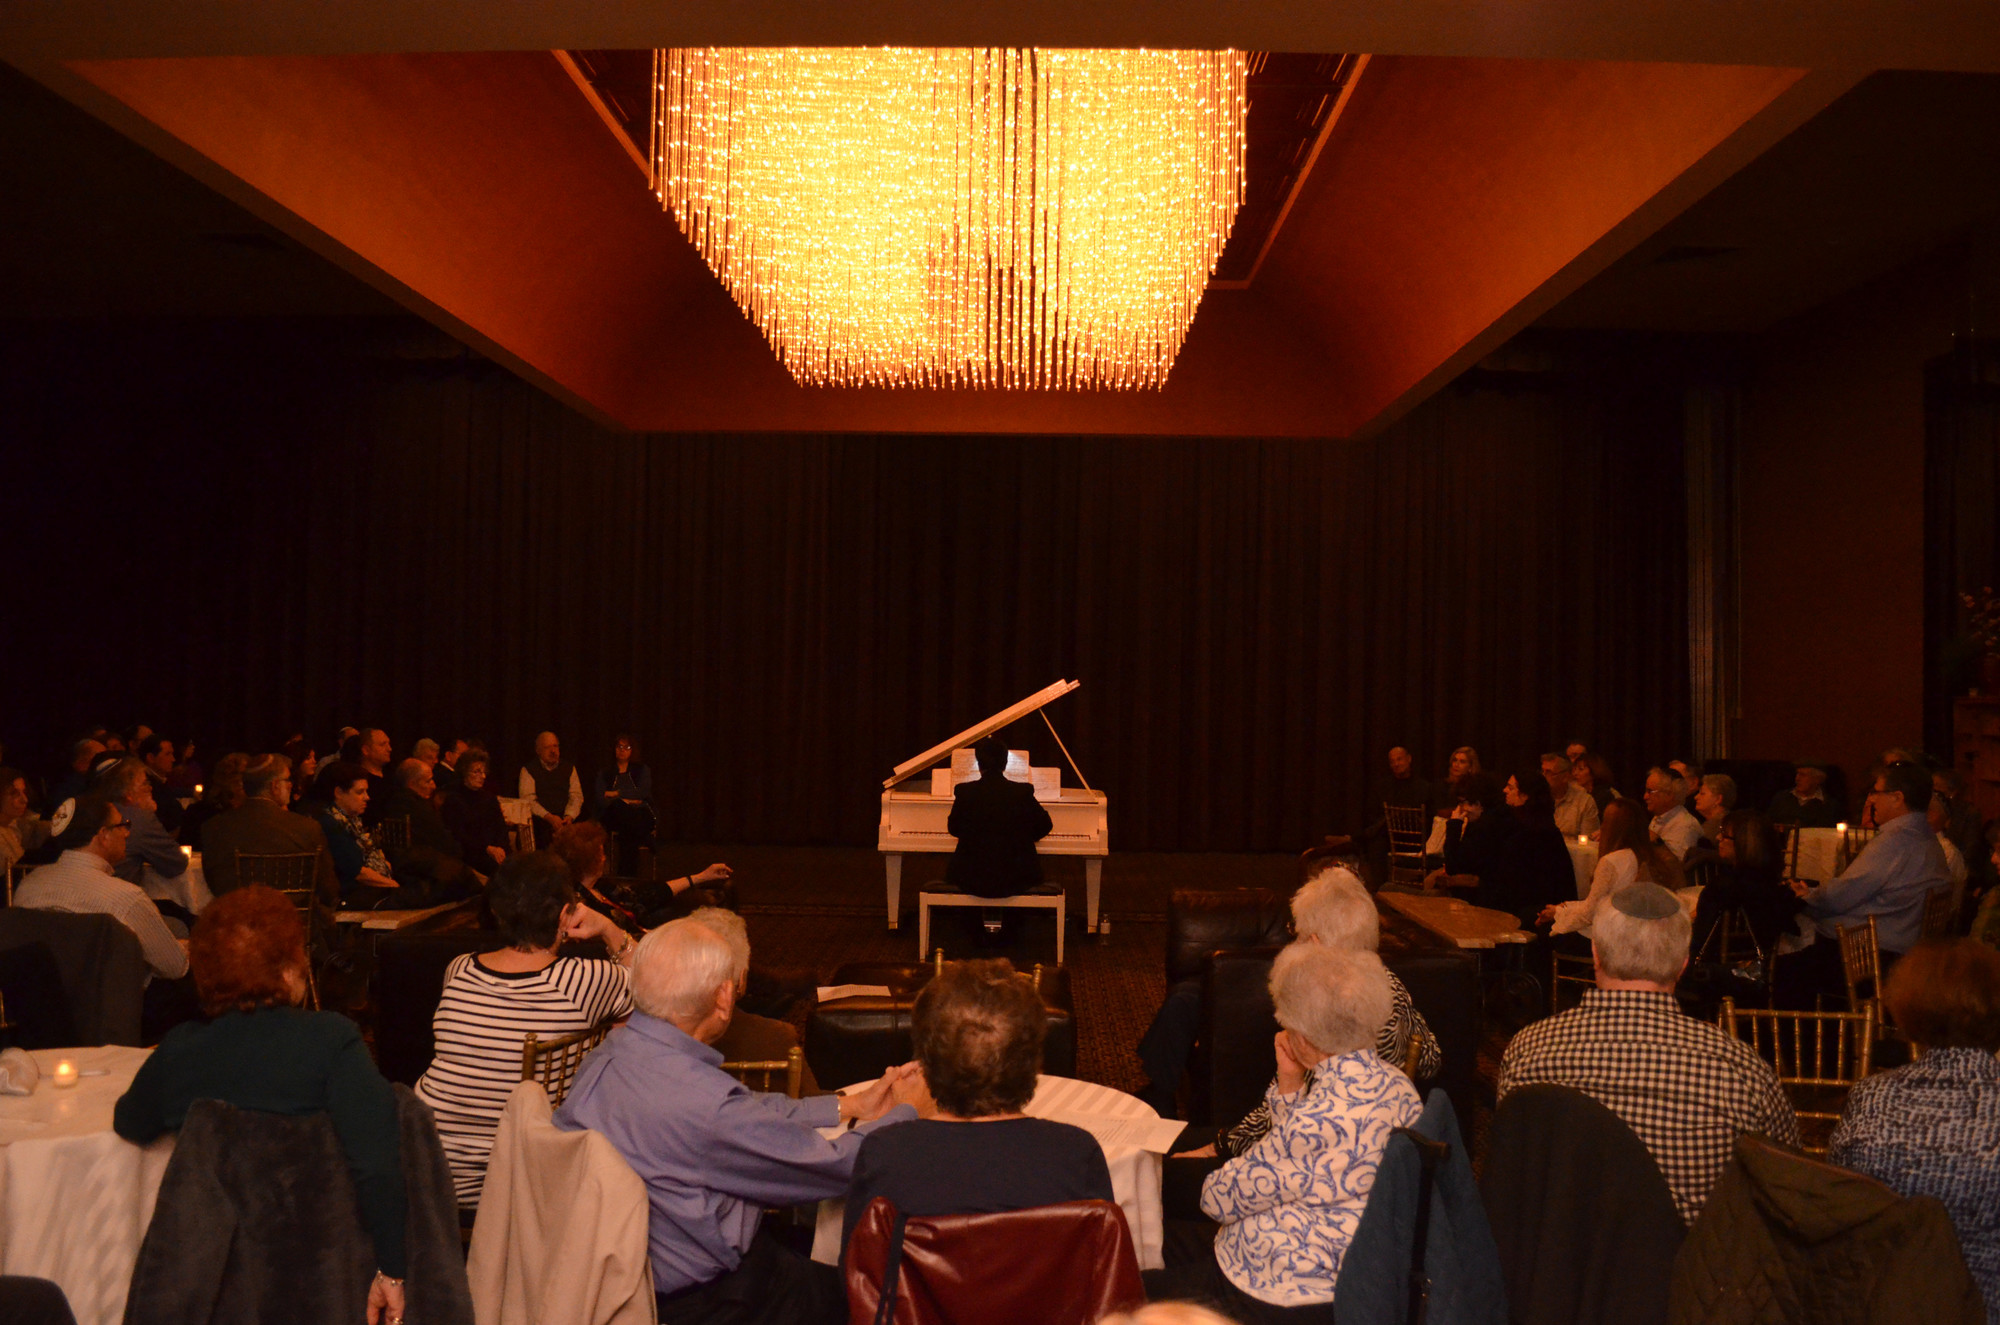 The shul’s “smorgasboard room” was converted into an intimate cabaret on Saturday, Dec. 12 for Biegel’s concert.